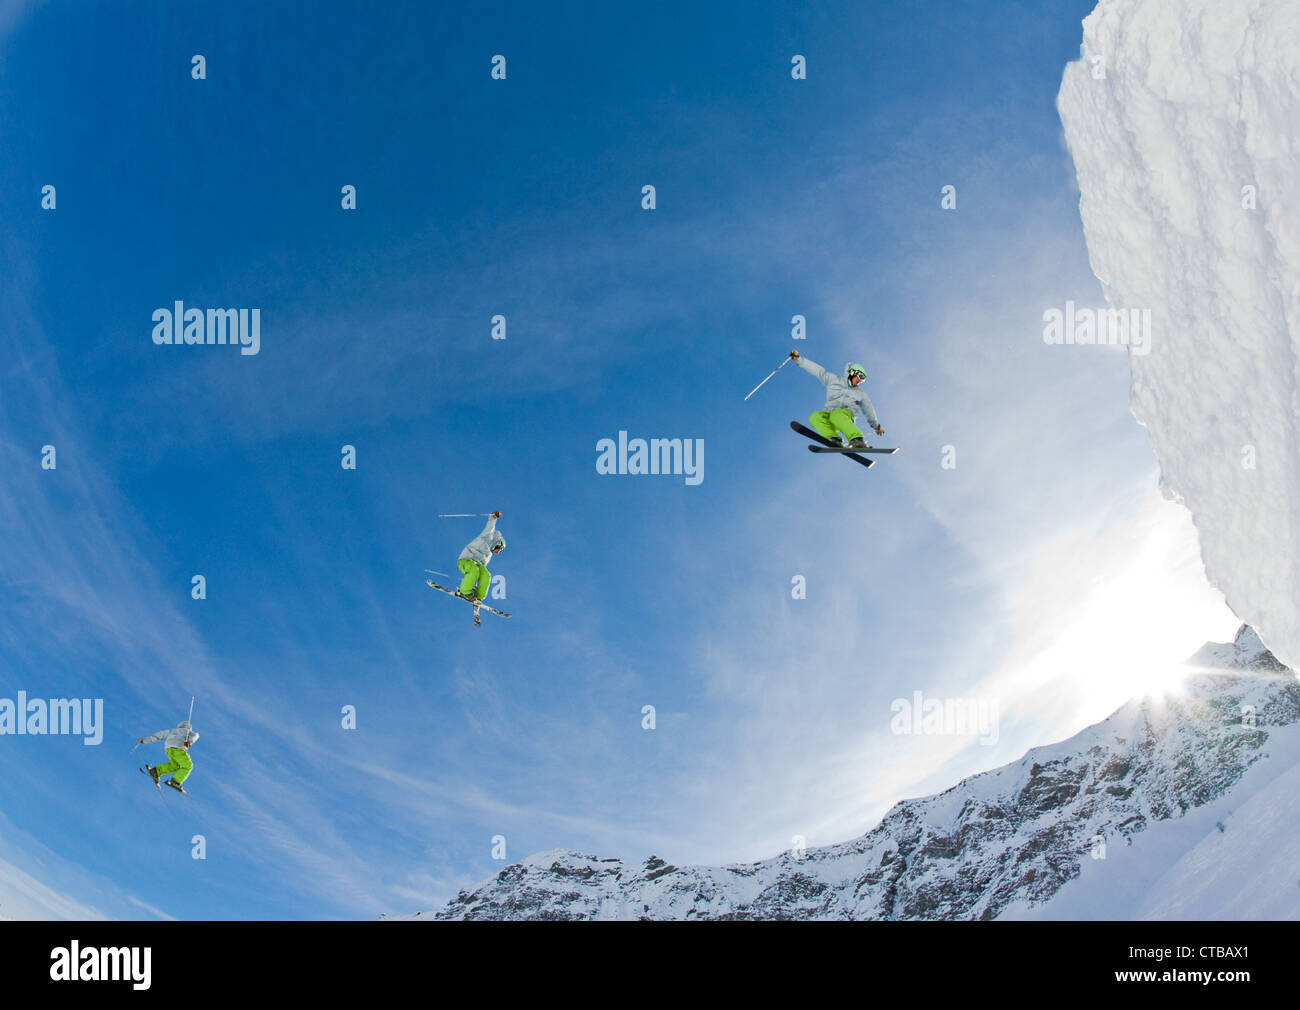 Freestyle skier performing big jump multiple image Winter Mystic Xperience 2009 Alagna Italy 18/22 feb 2009 Italian Stage Stock Photo